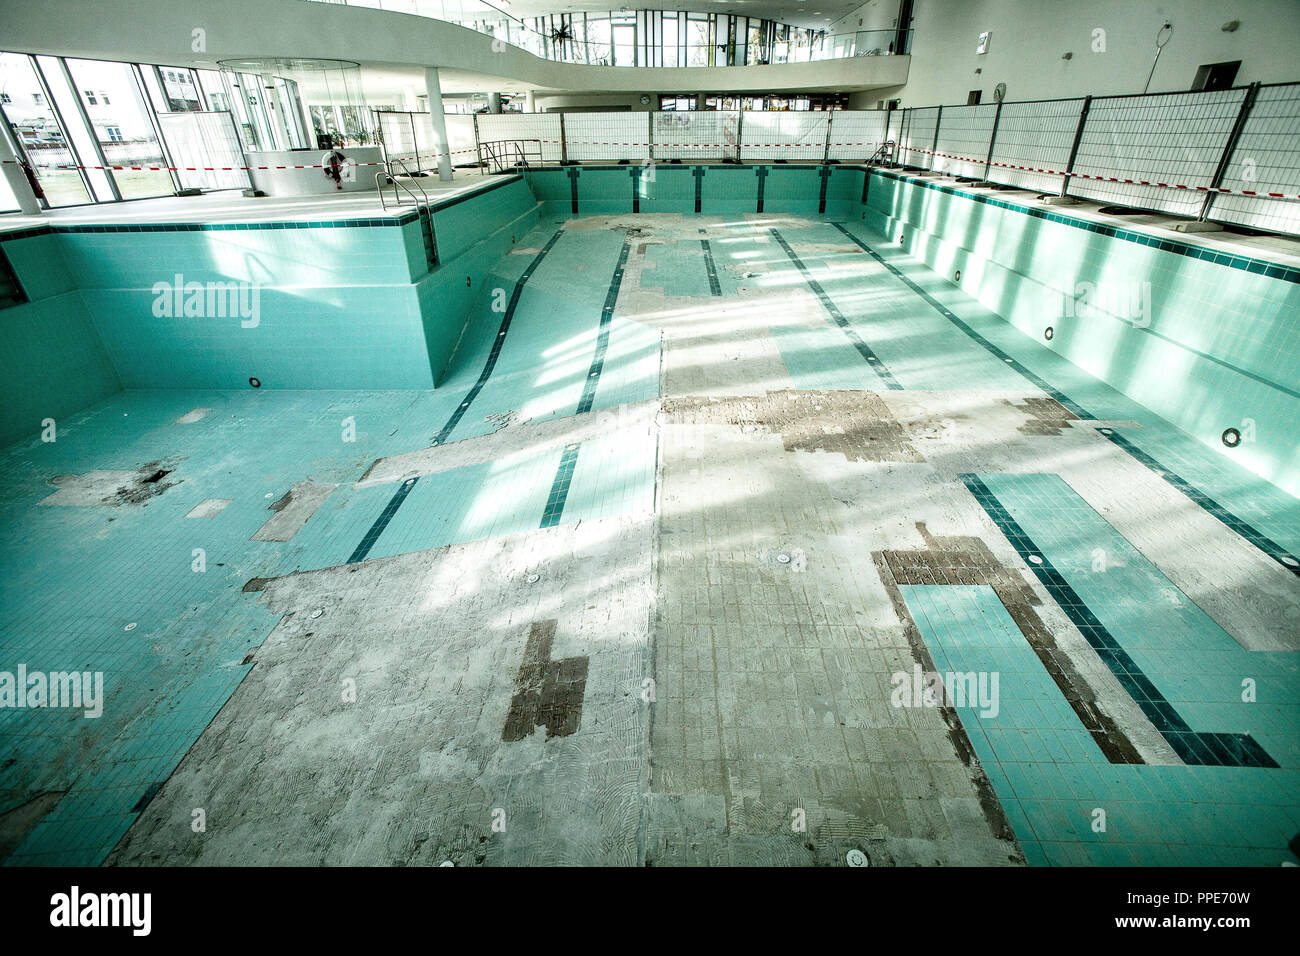 In the renovation-requiring indoor swimming pool in Ismaning, tiles are detached from the floor of the large swimming pool. Stock Photo